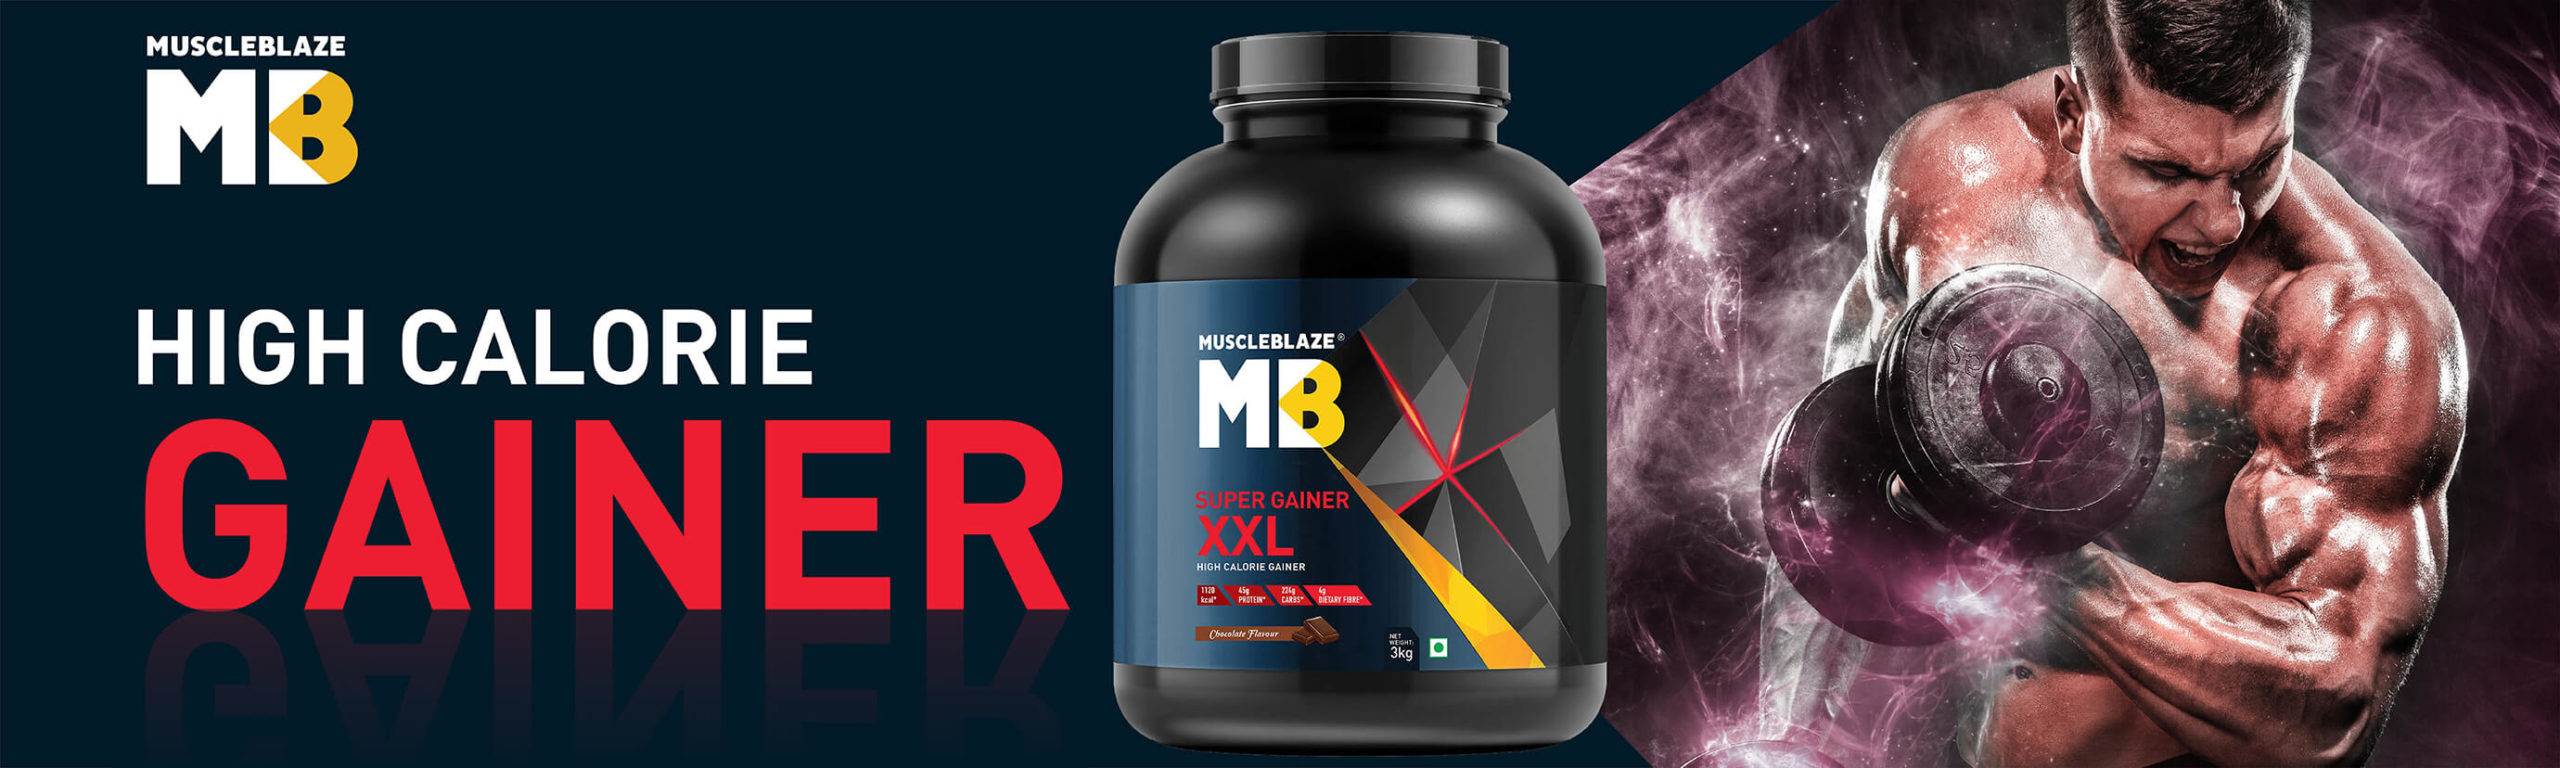 Muscleblaze Super Gainer XXL uses, price & side effects